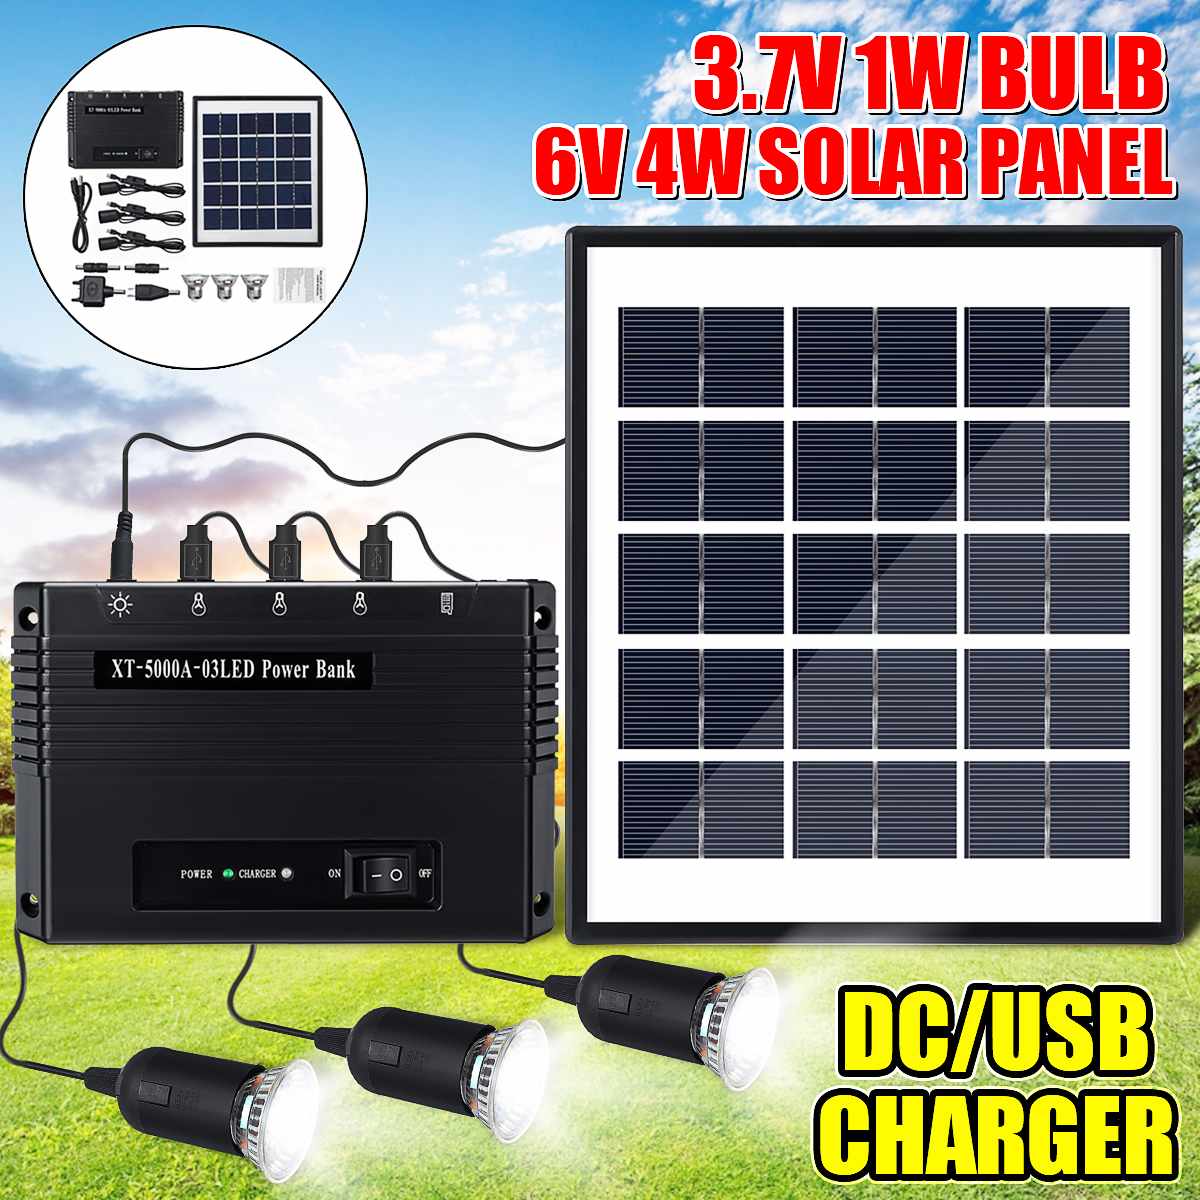 Smuxi 3pcs 1W Solar Lamp LED Tuin Licht Outdoor Lampe Solaire + 6V 4W Zonnepaneel + 5000mAh DC Power Bank Voor Outdoor Camping